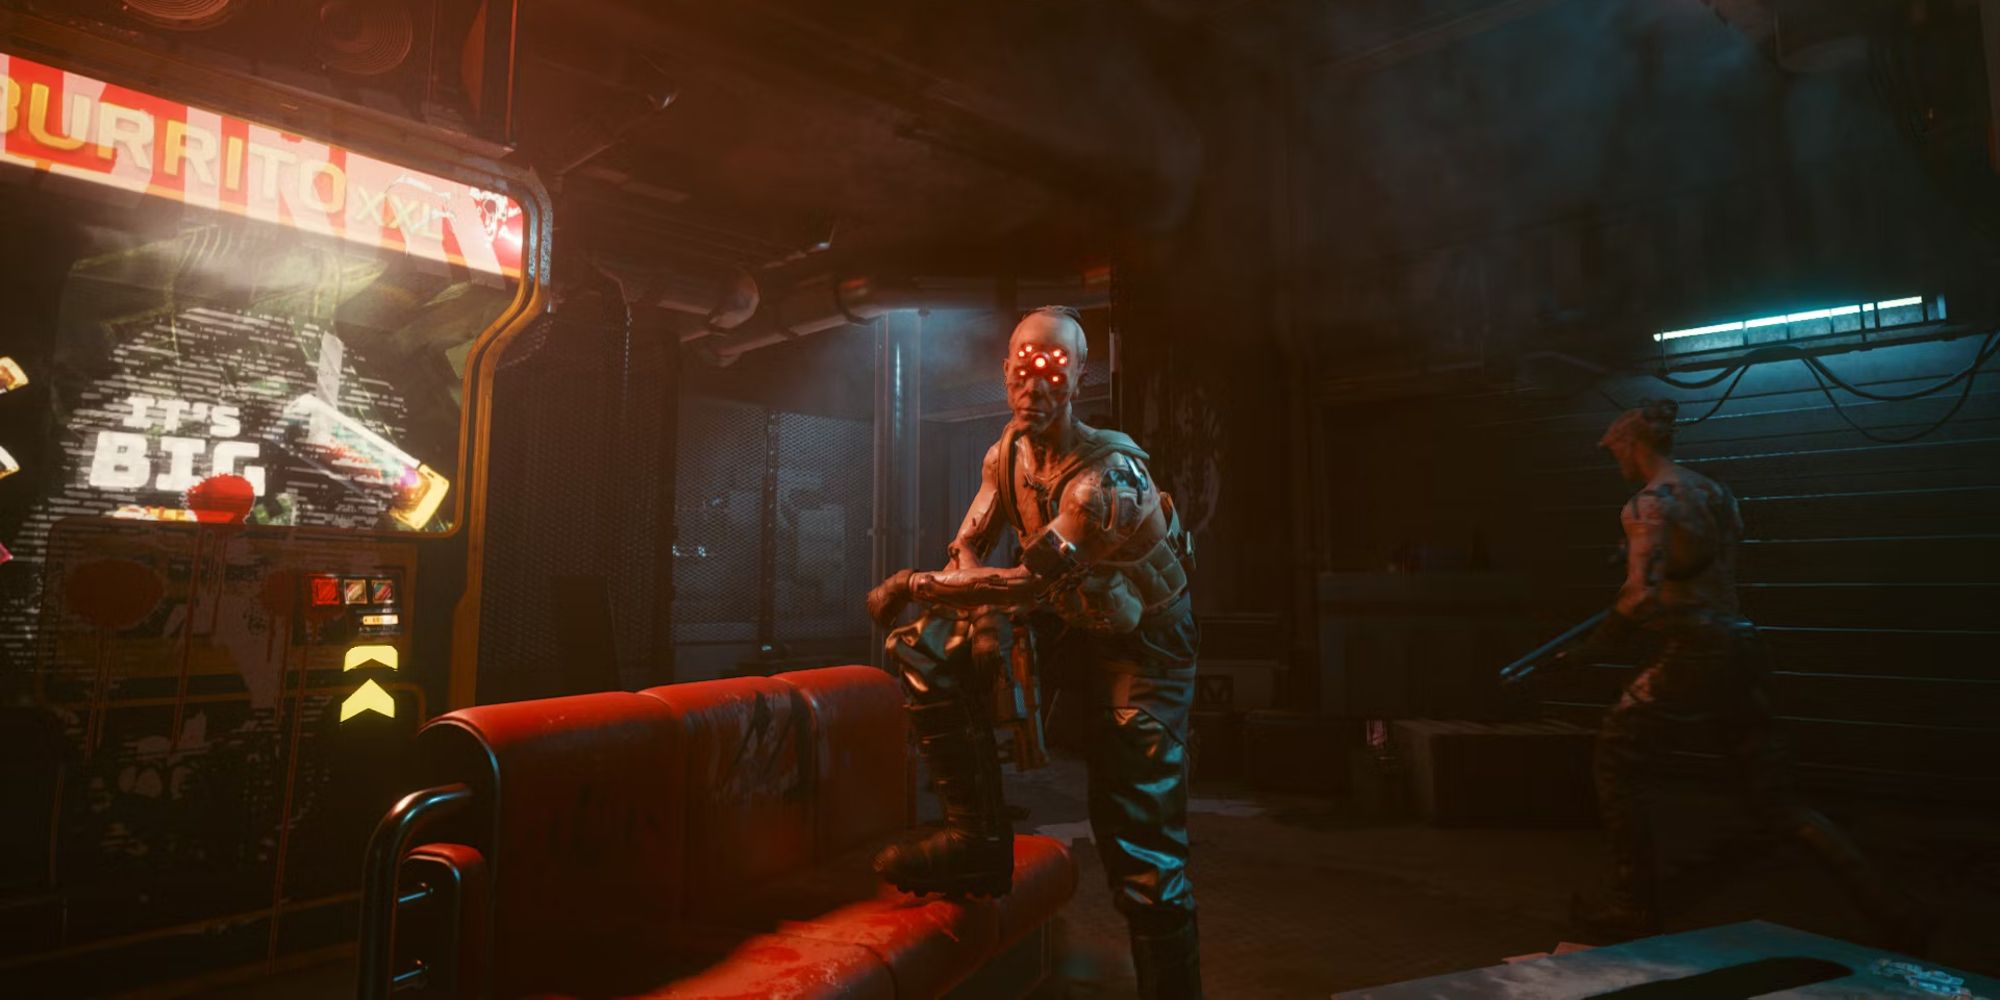 Dum-Dum standing on a couch in Cyberpunk 2077.